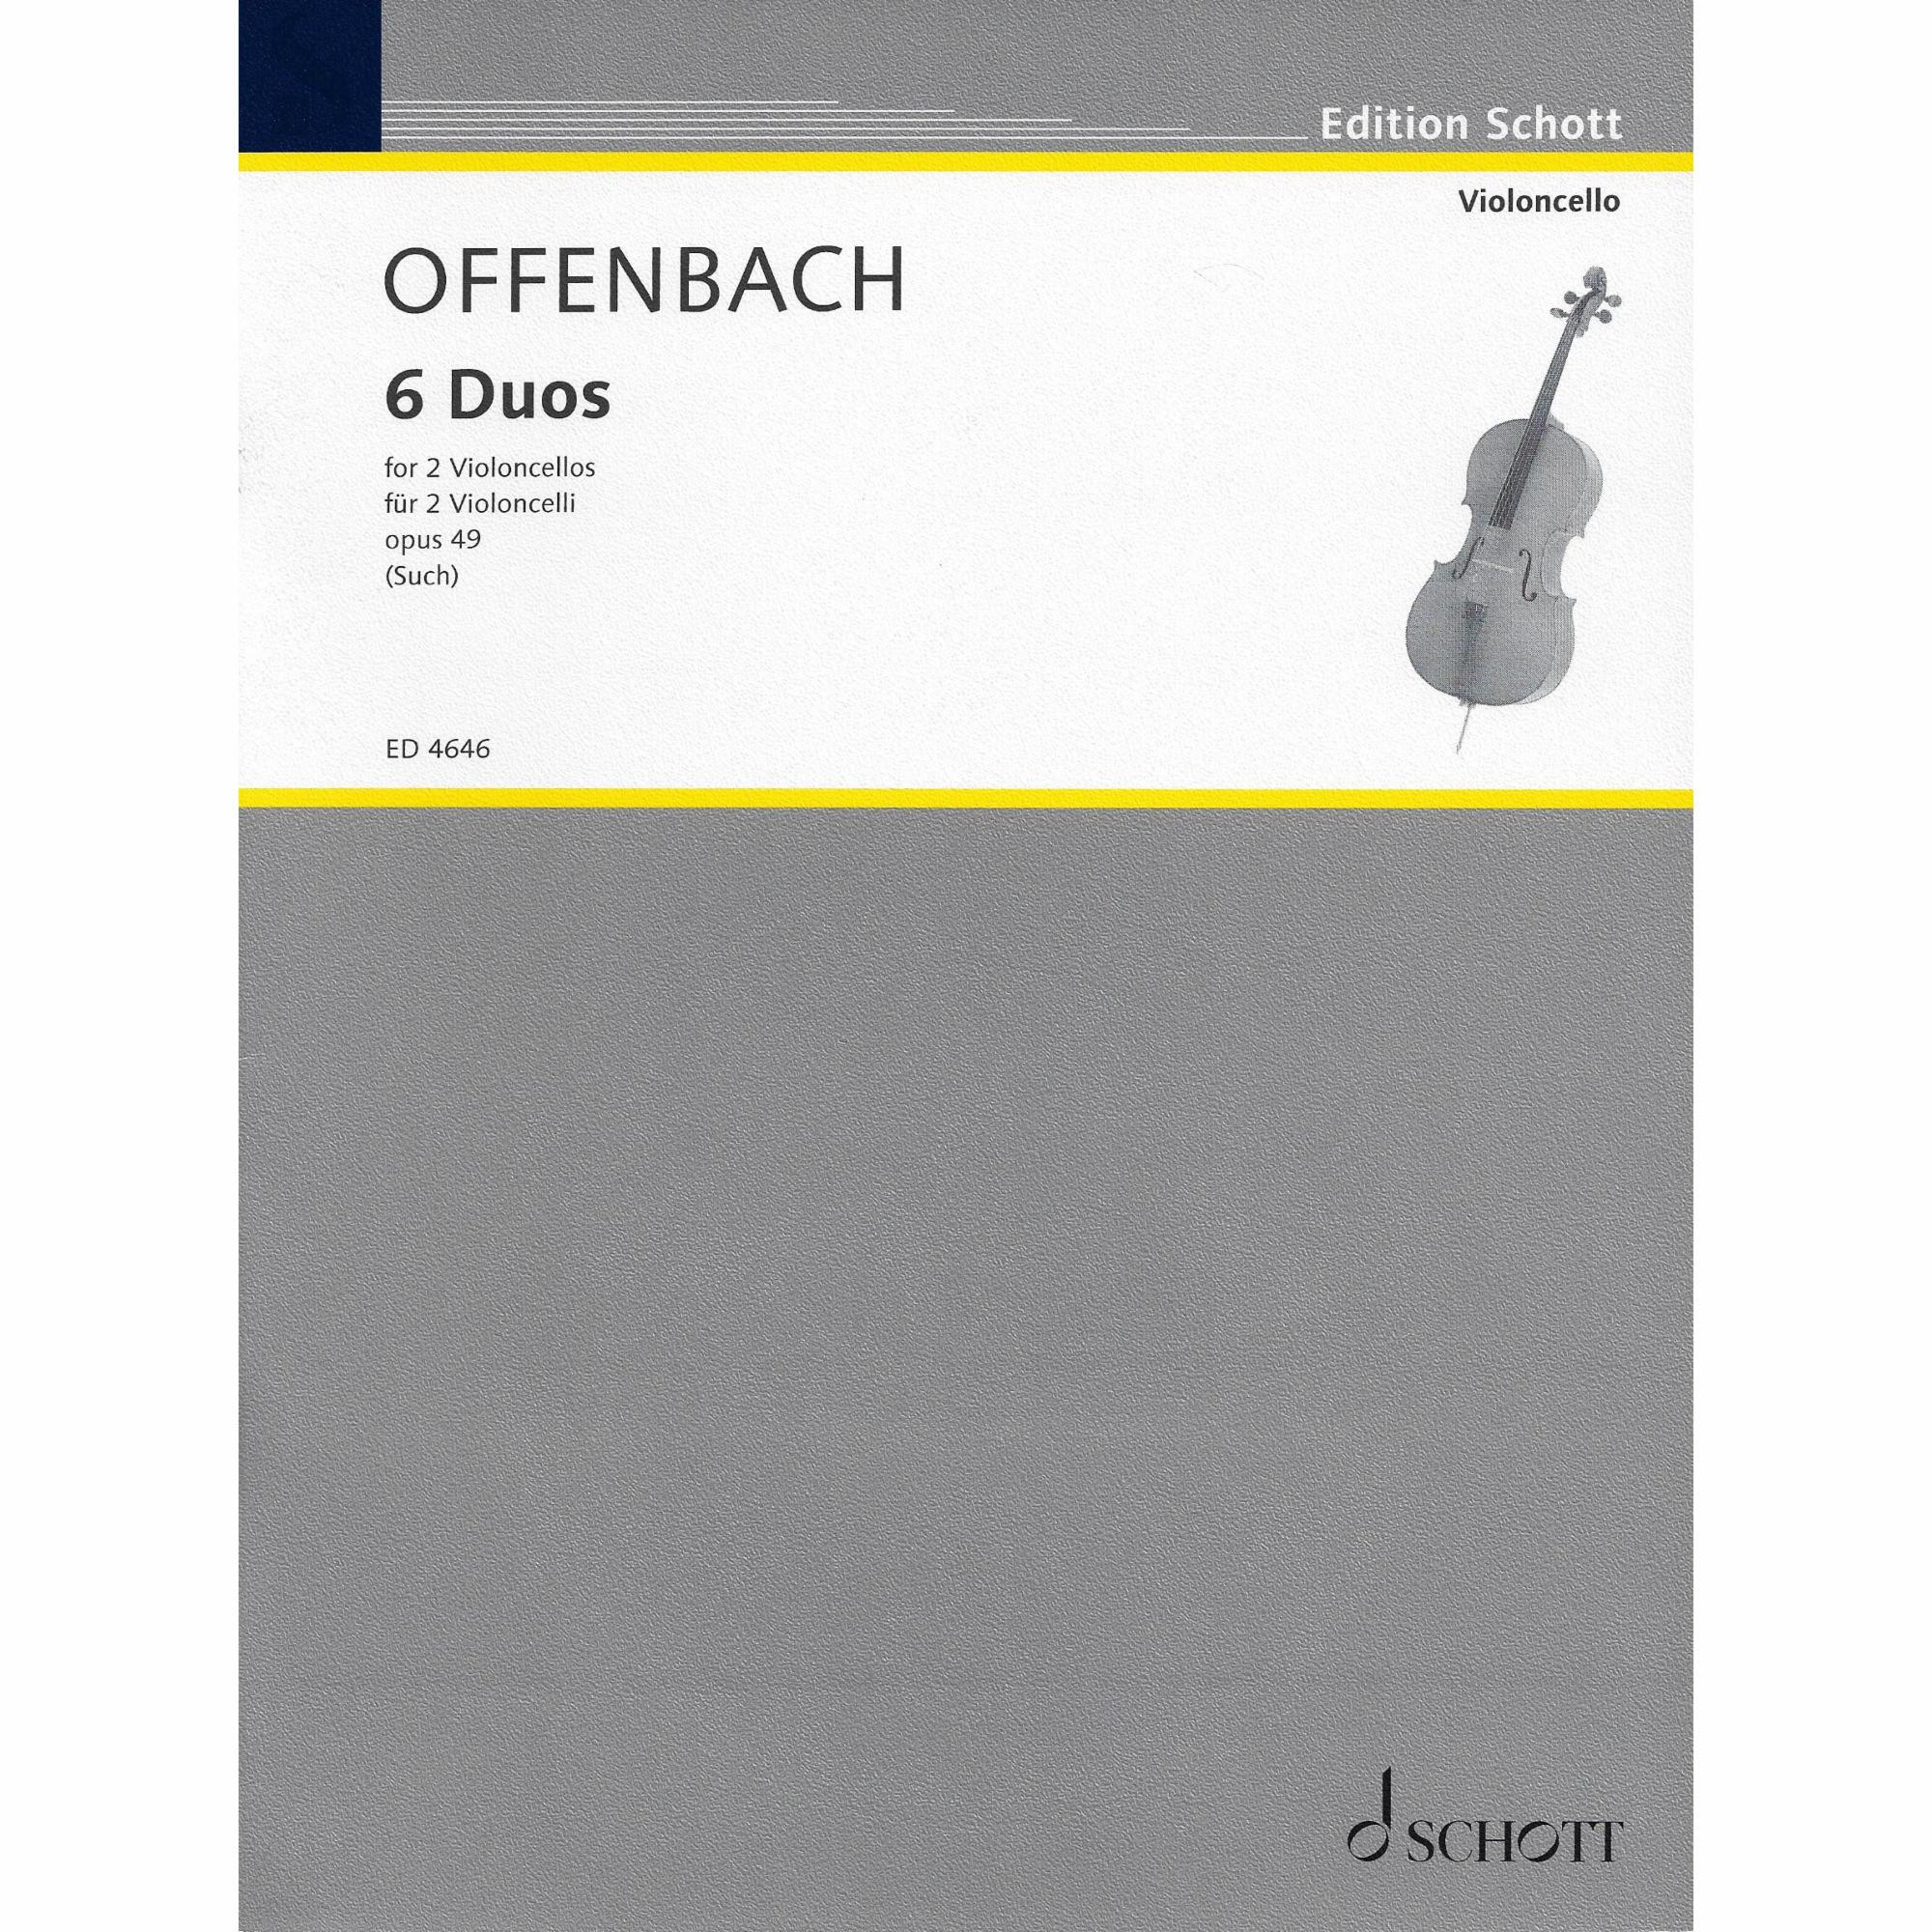 Offenbach -- 6 Duos, Op. 49 for Two Cellos